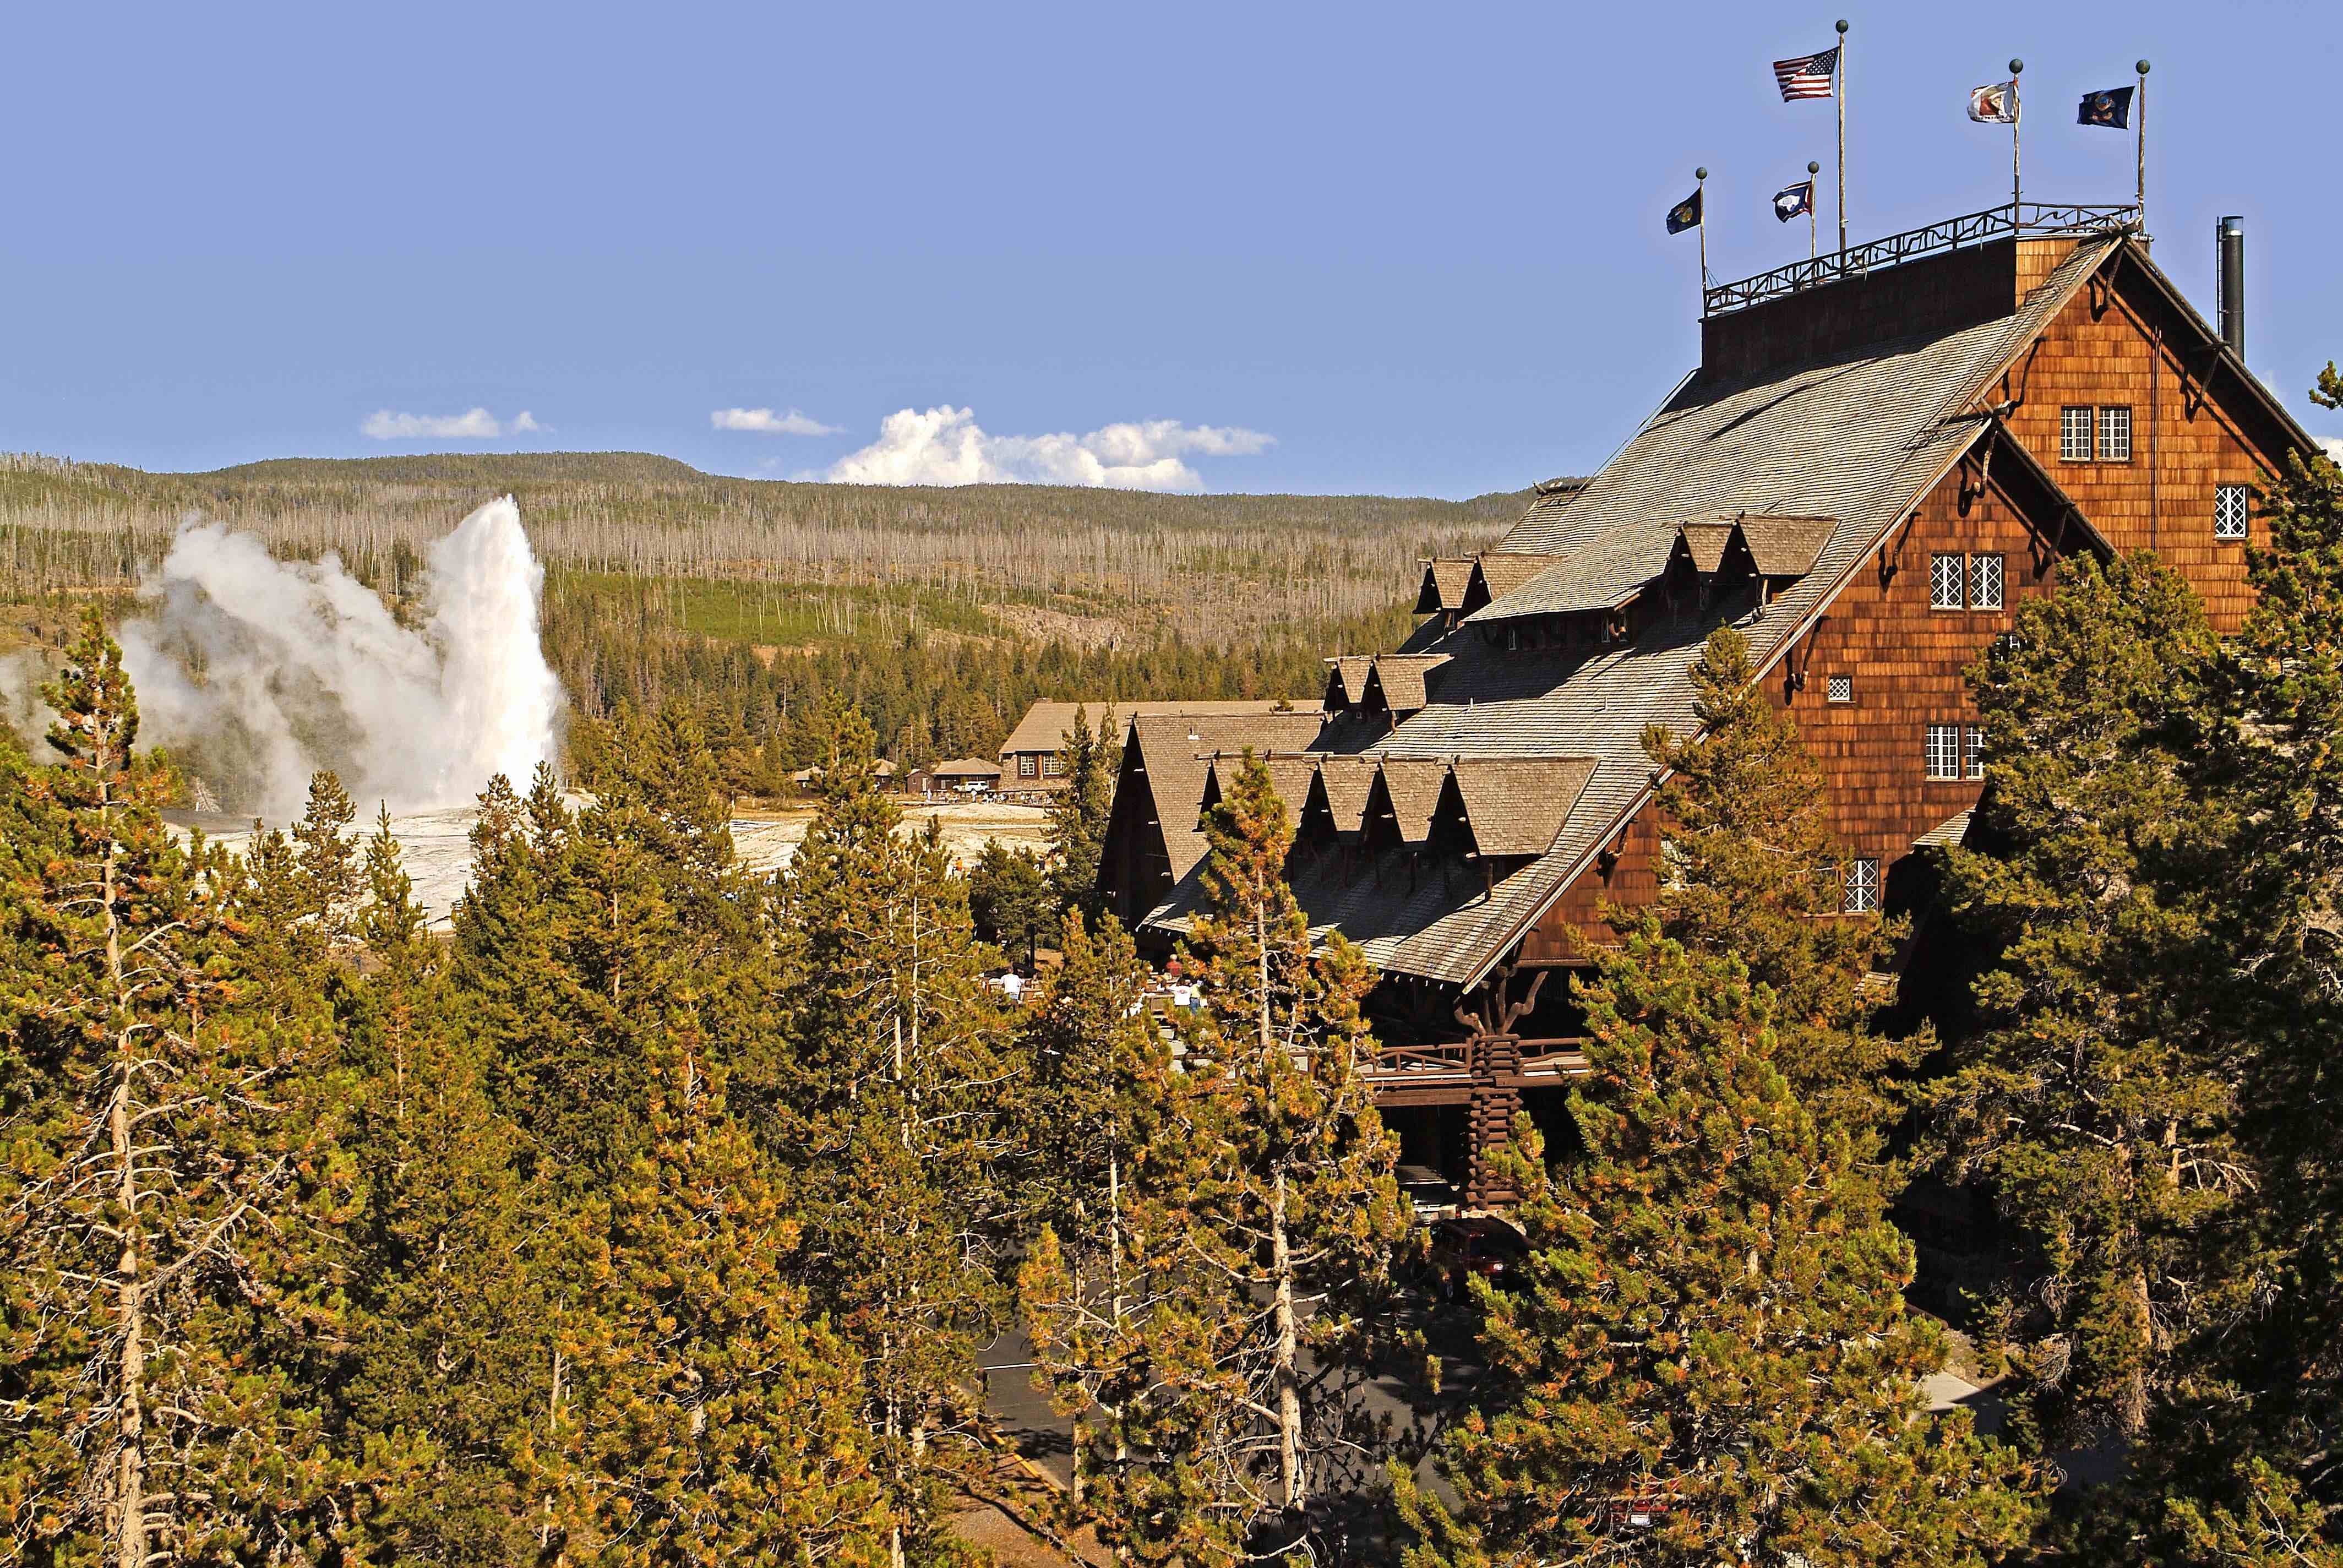 Yellowstone National Park Lodging - national park